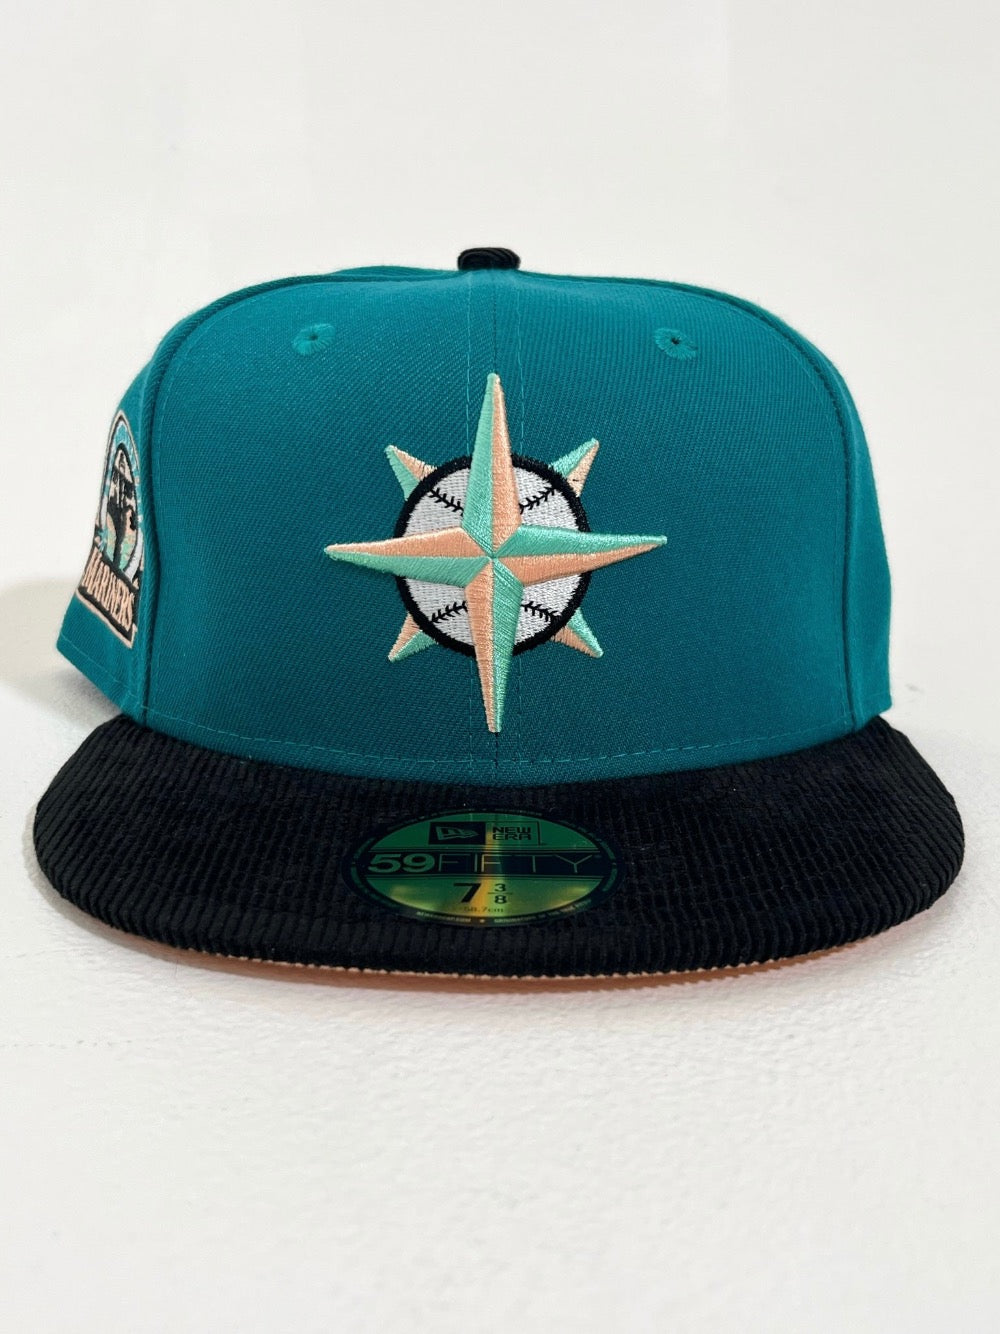 Seattle Mariners Fitted Hat